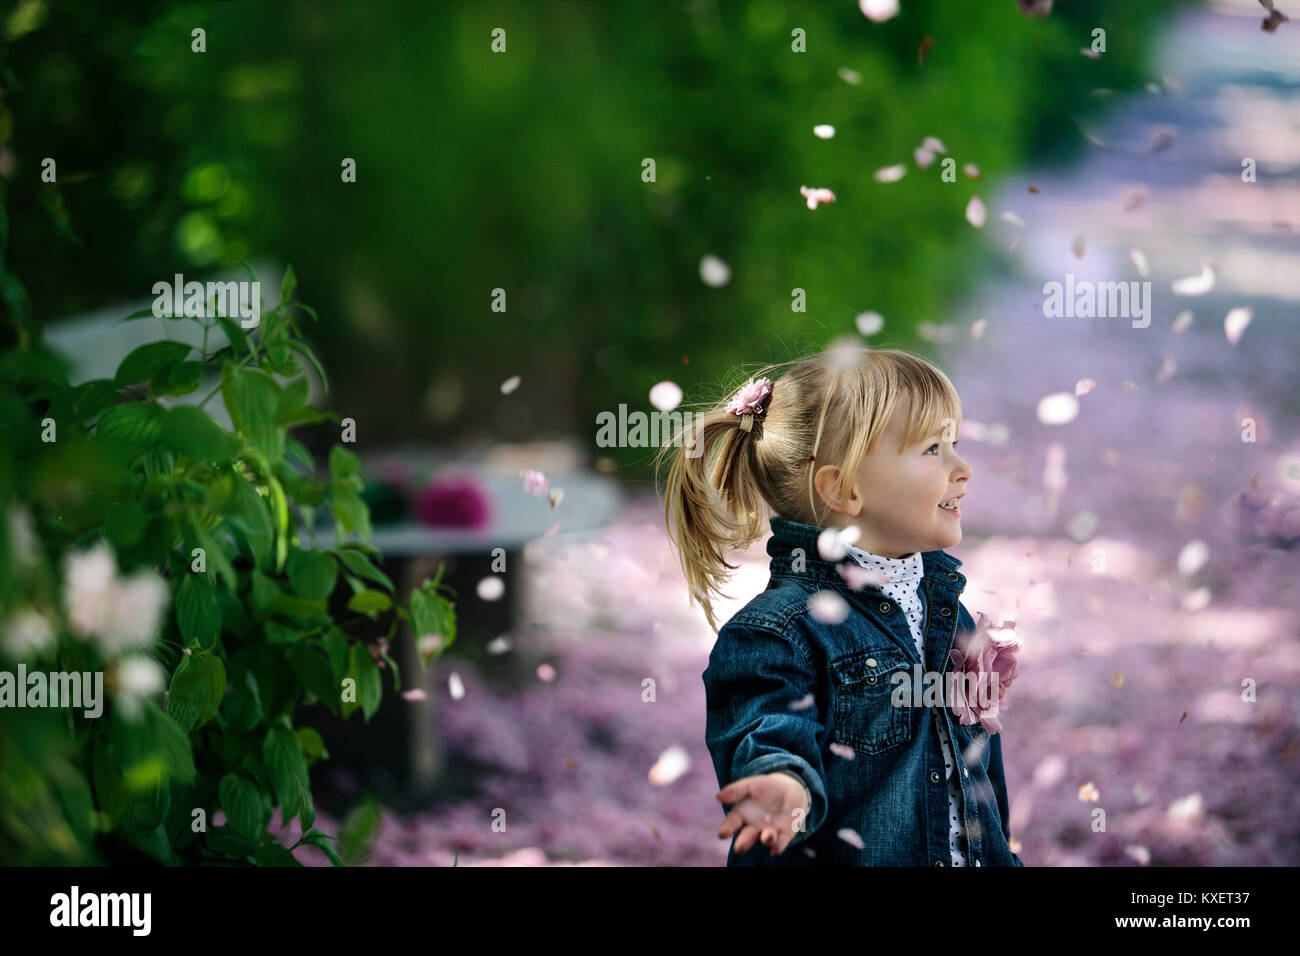 Portrait of a Girl and Cherry Tree Flowers in Spring Stock Photo